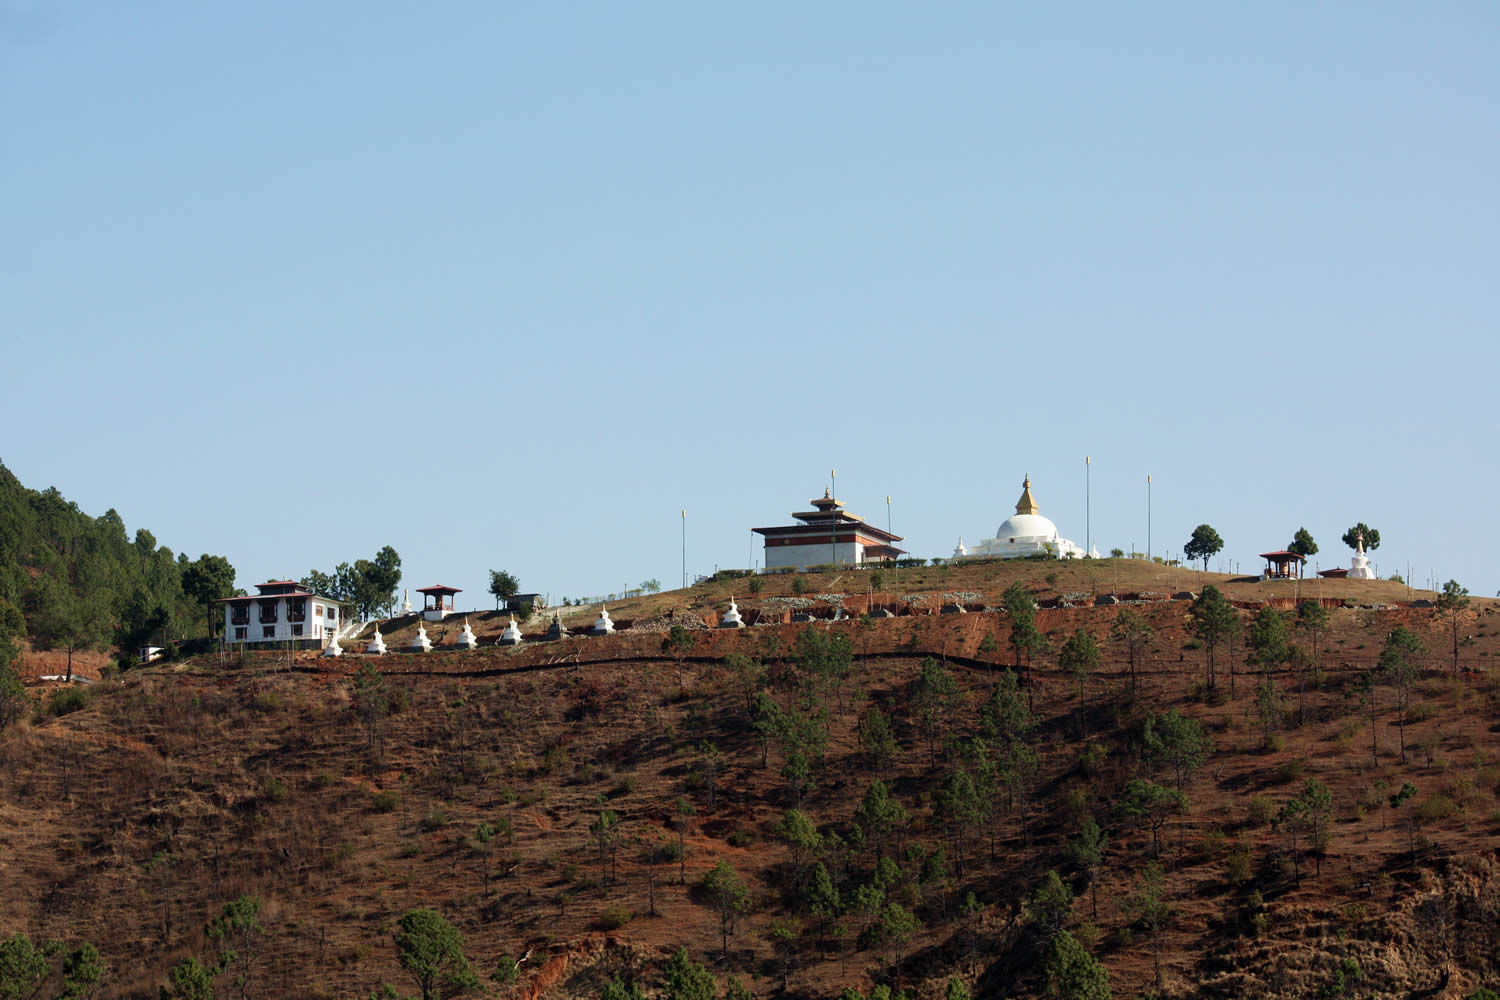 View of Talo Sangha Choling Nunnery from road.